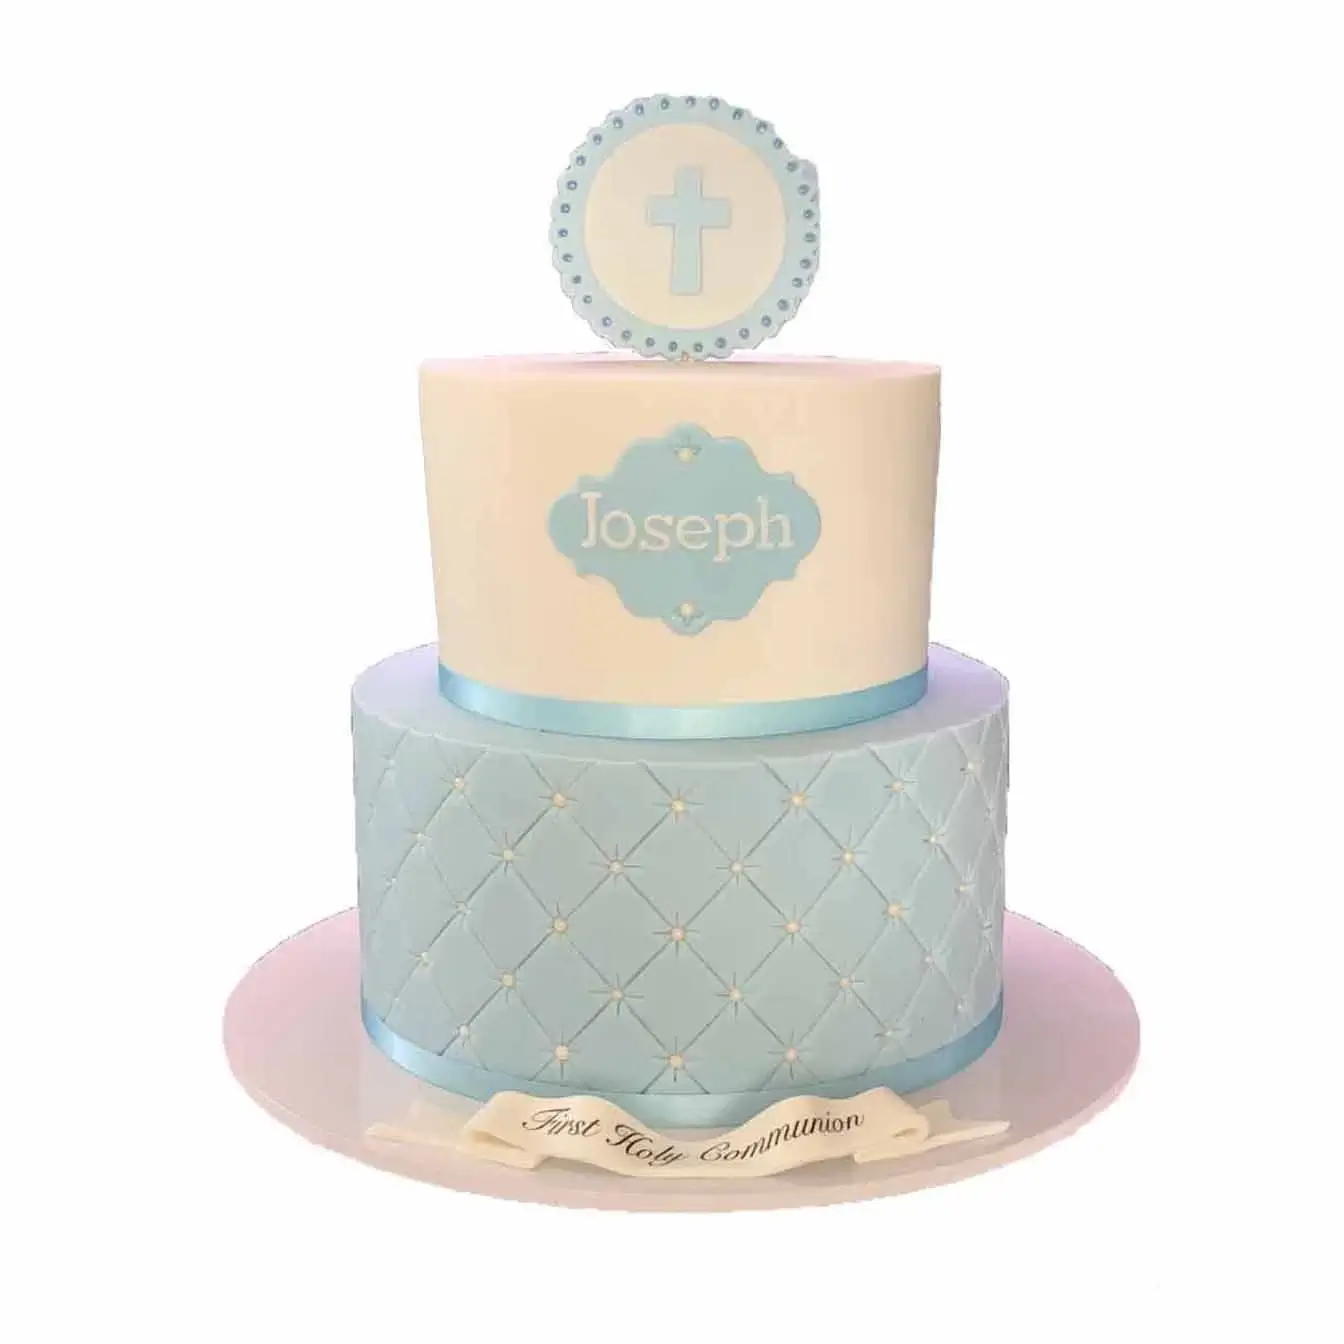 Heavenly Blue Communion Cake - A two-tier cake with a light blue quilted base tier, a white top tier with a name plaque and cross on top, a refined and meaningful centerpiece for Holy Communion celebrations.